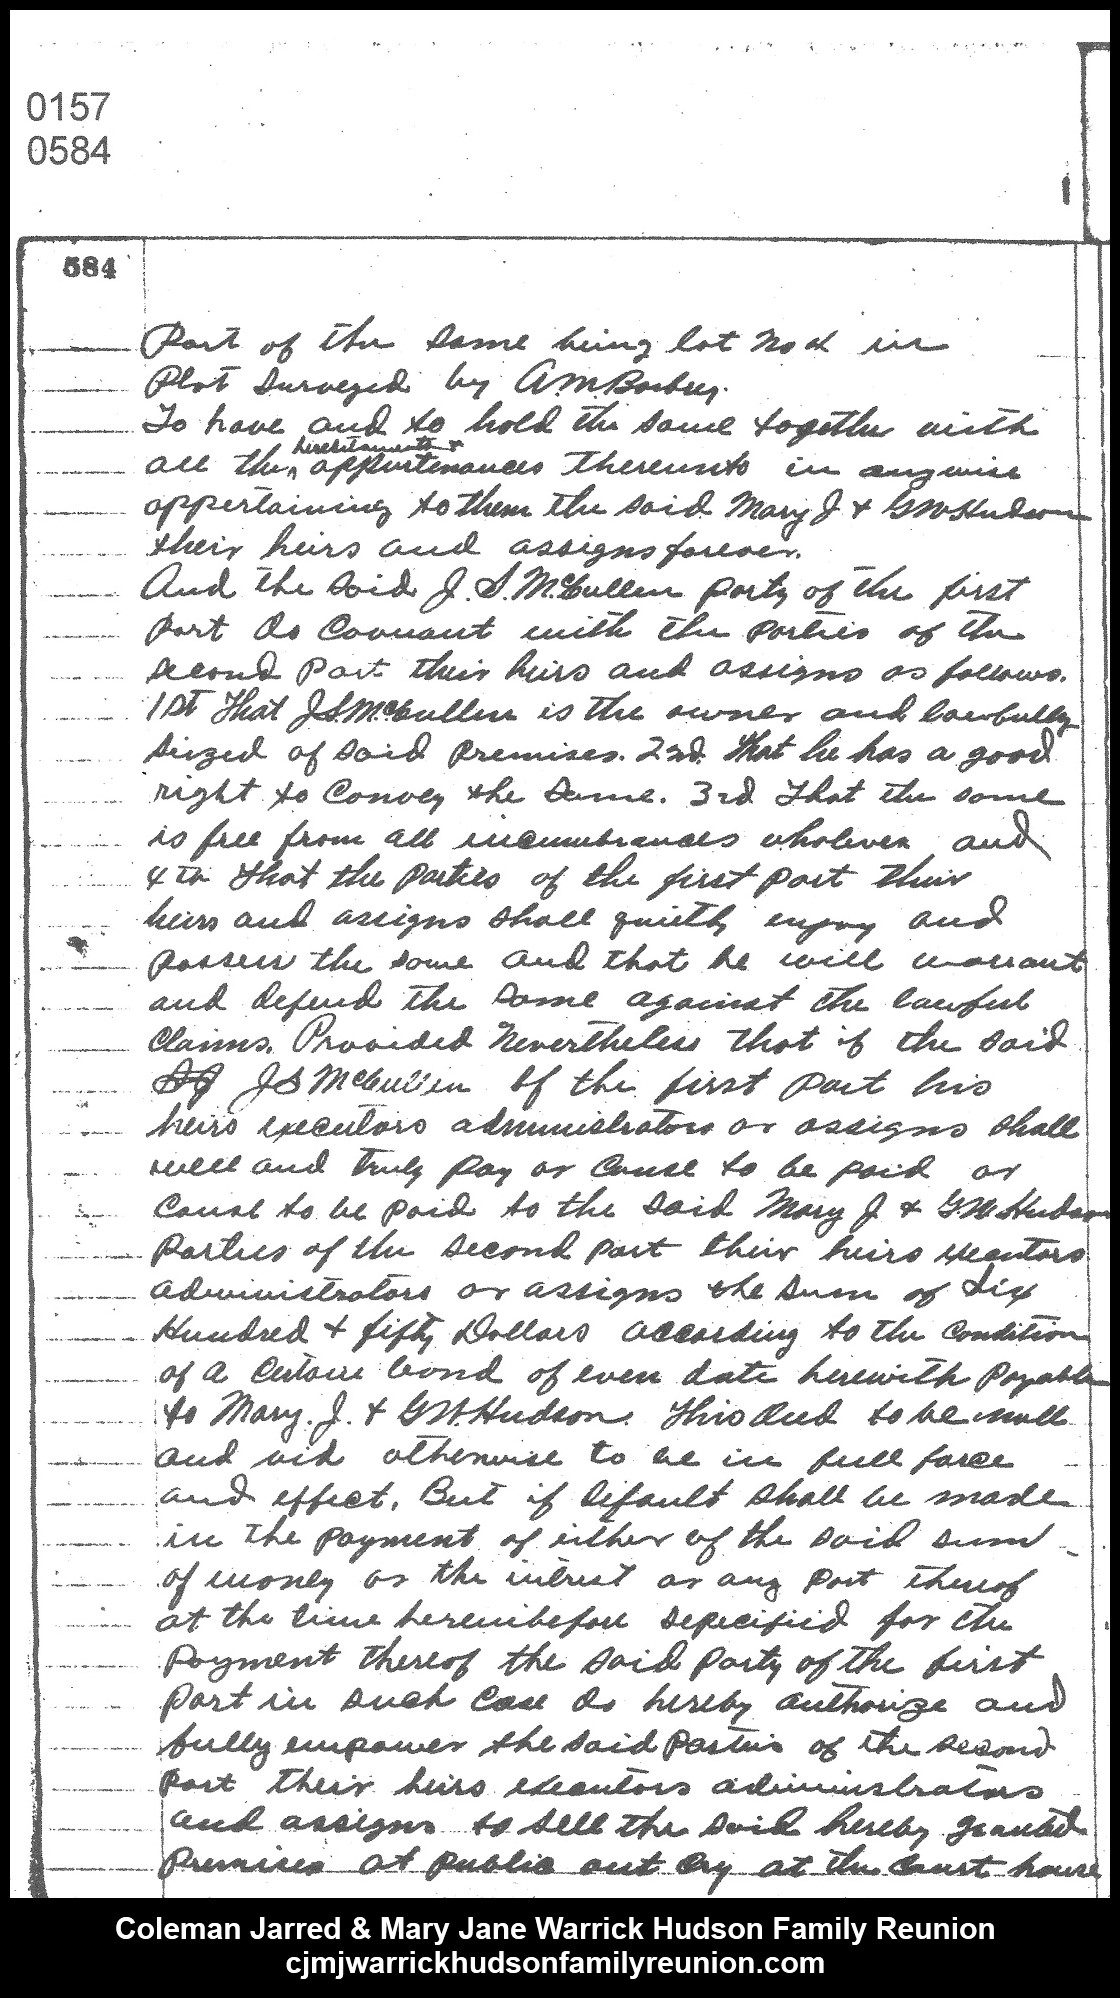 1907, 10-9 - Deed - J. S. McCullen to MJ & George ([page 2 of 3)